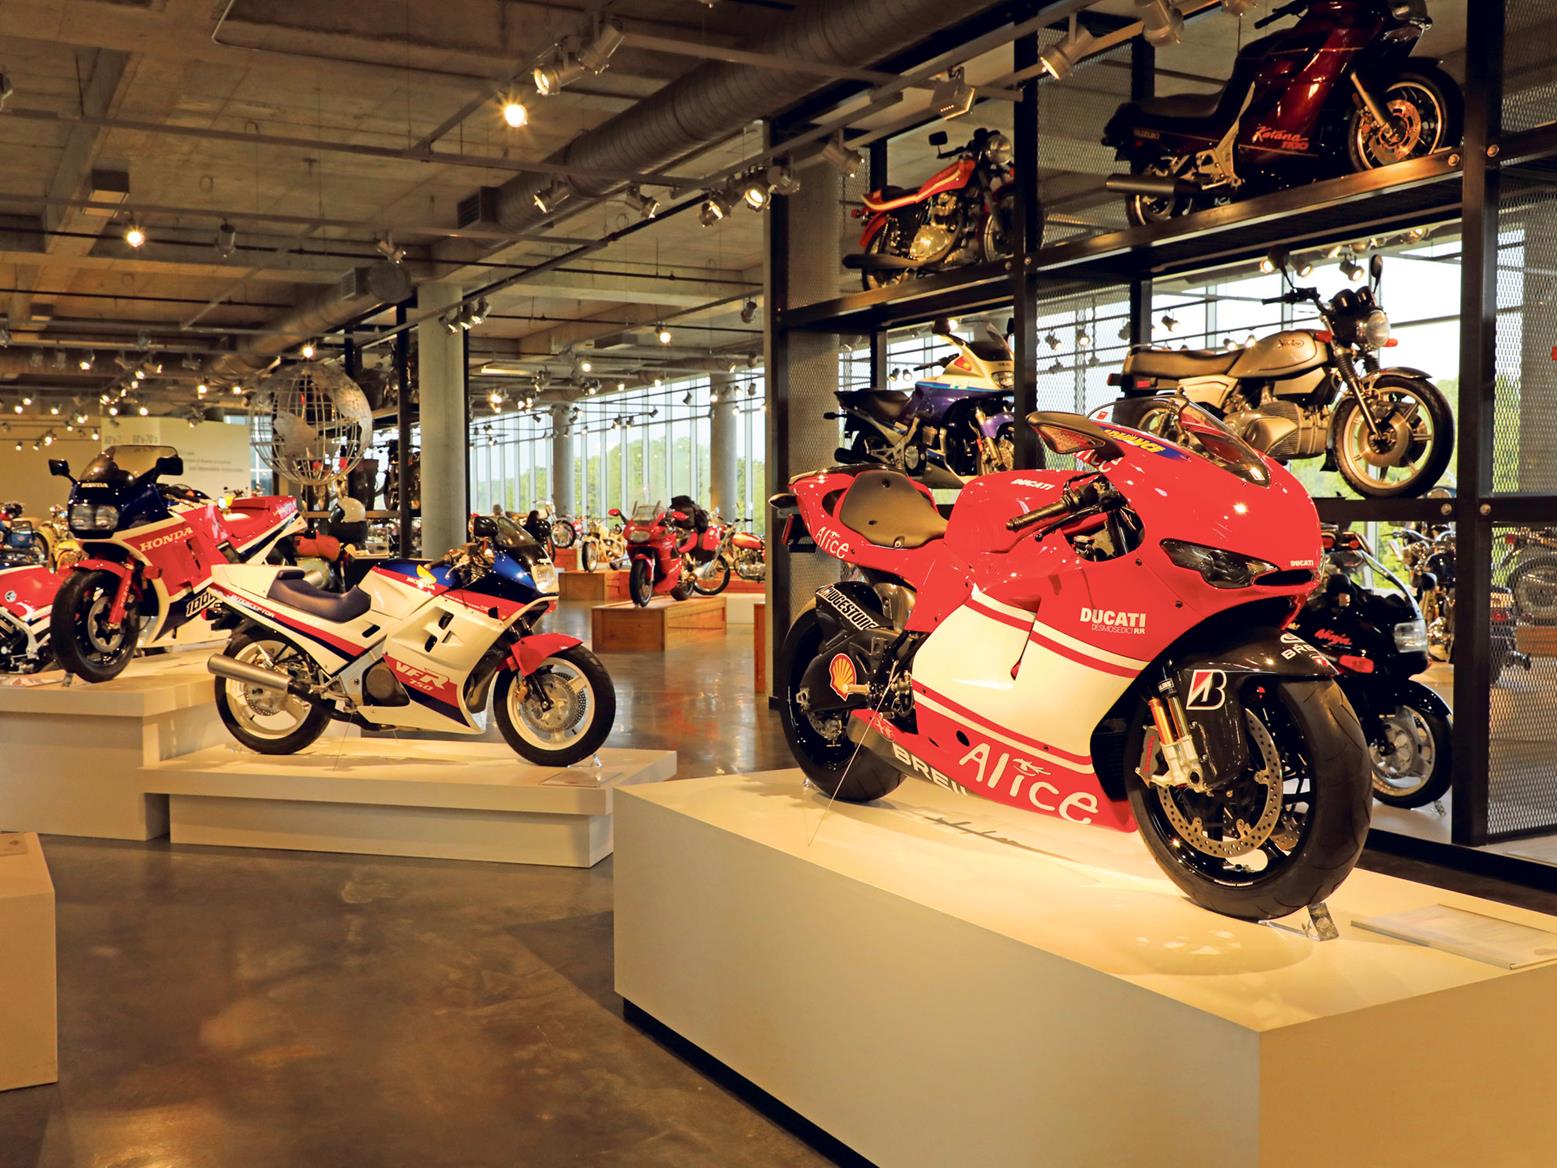 A glimpse at "motorcycling mecca" - the Barber Vintage Motorsports Museum | MCN